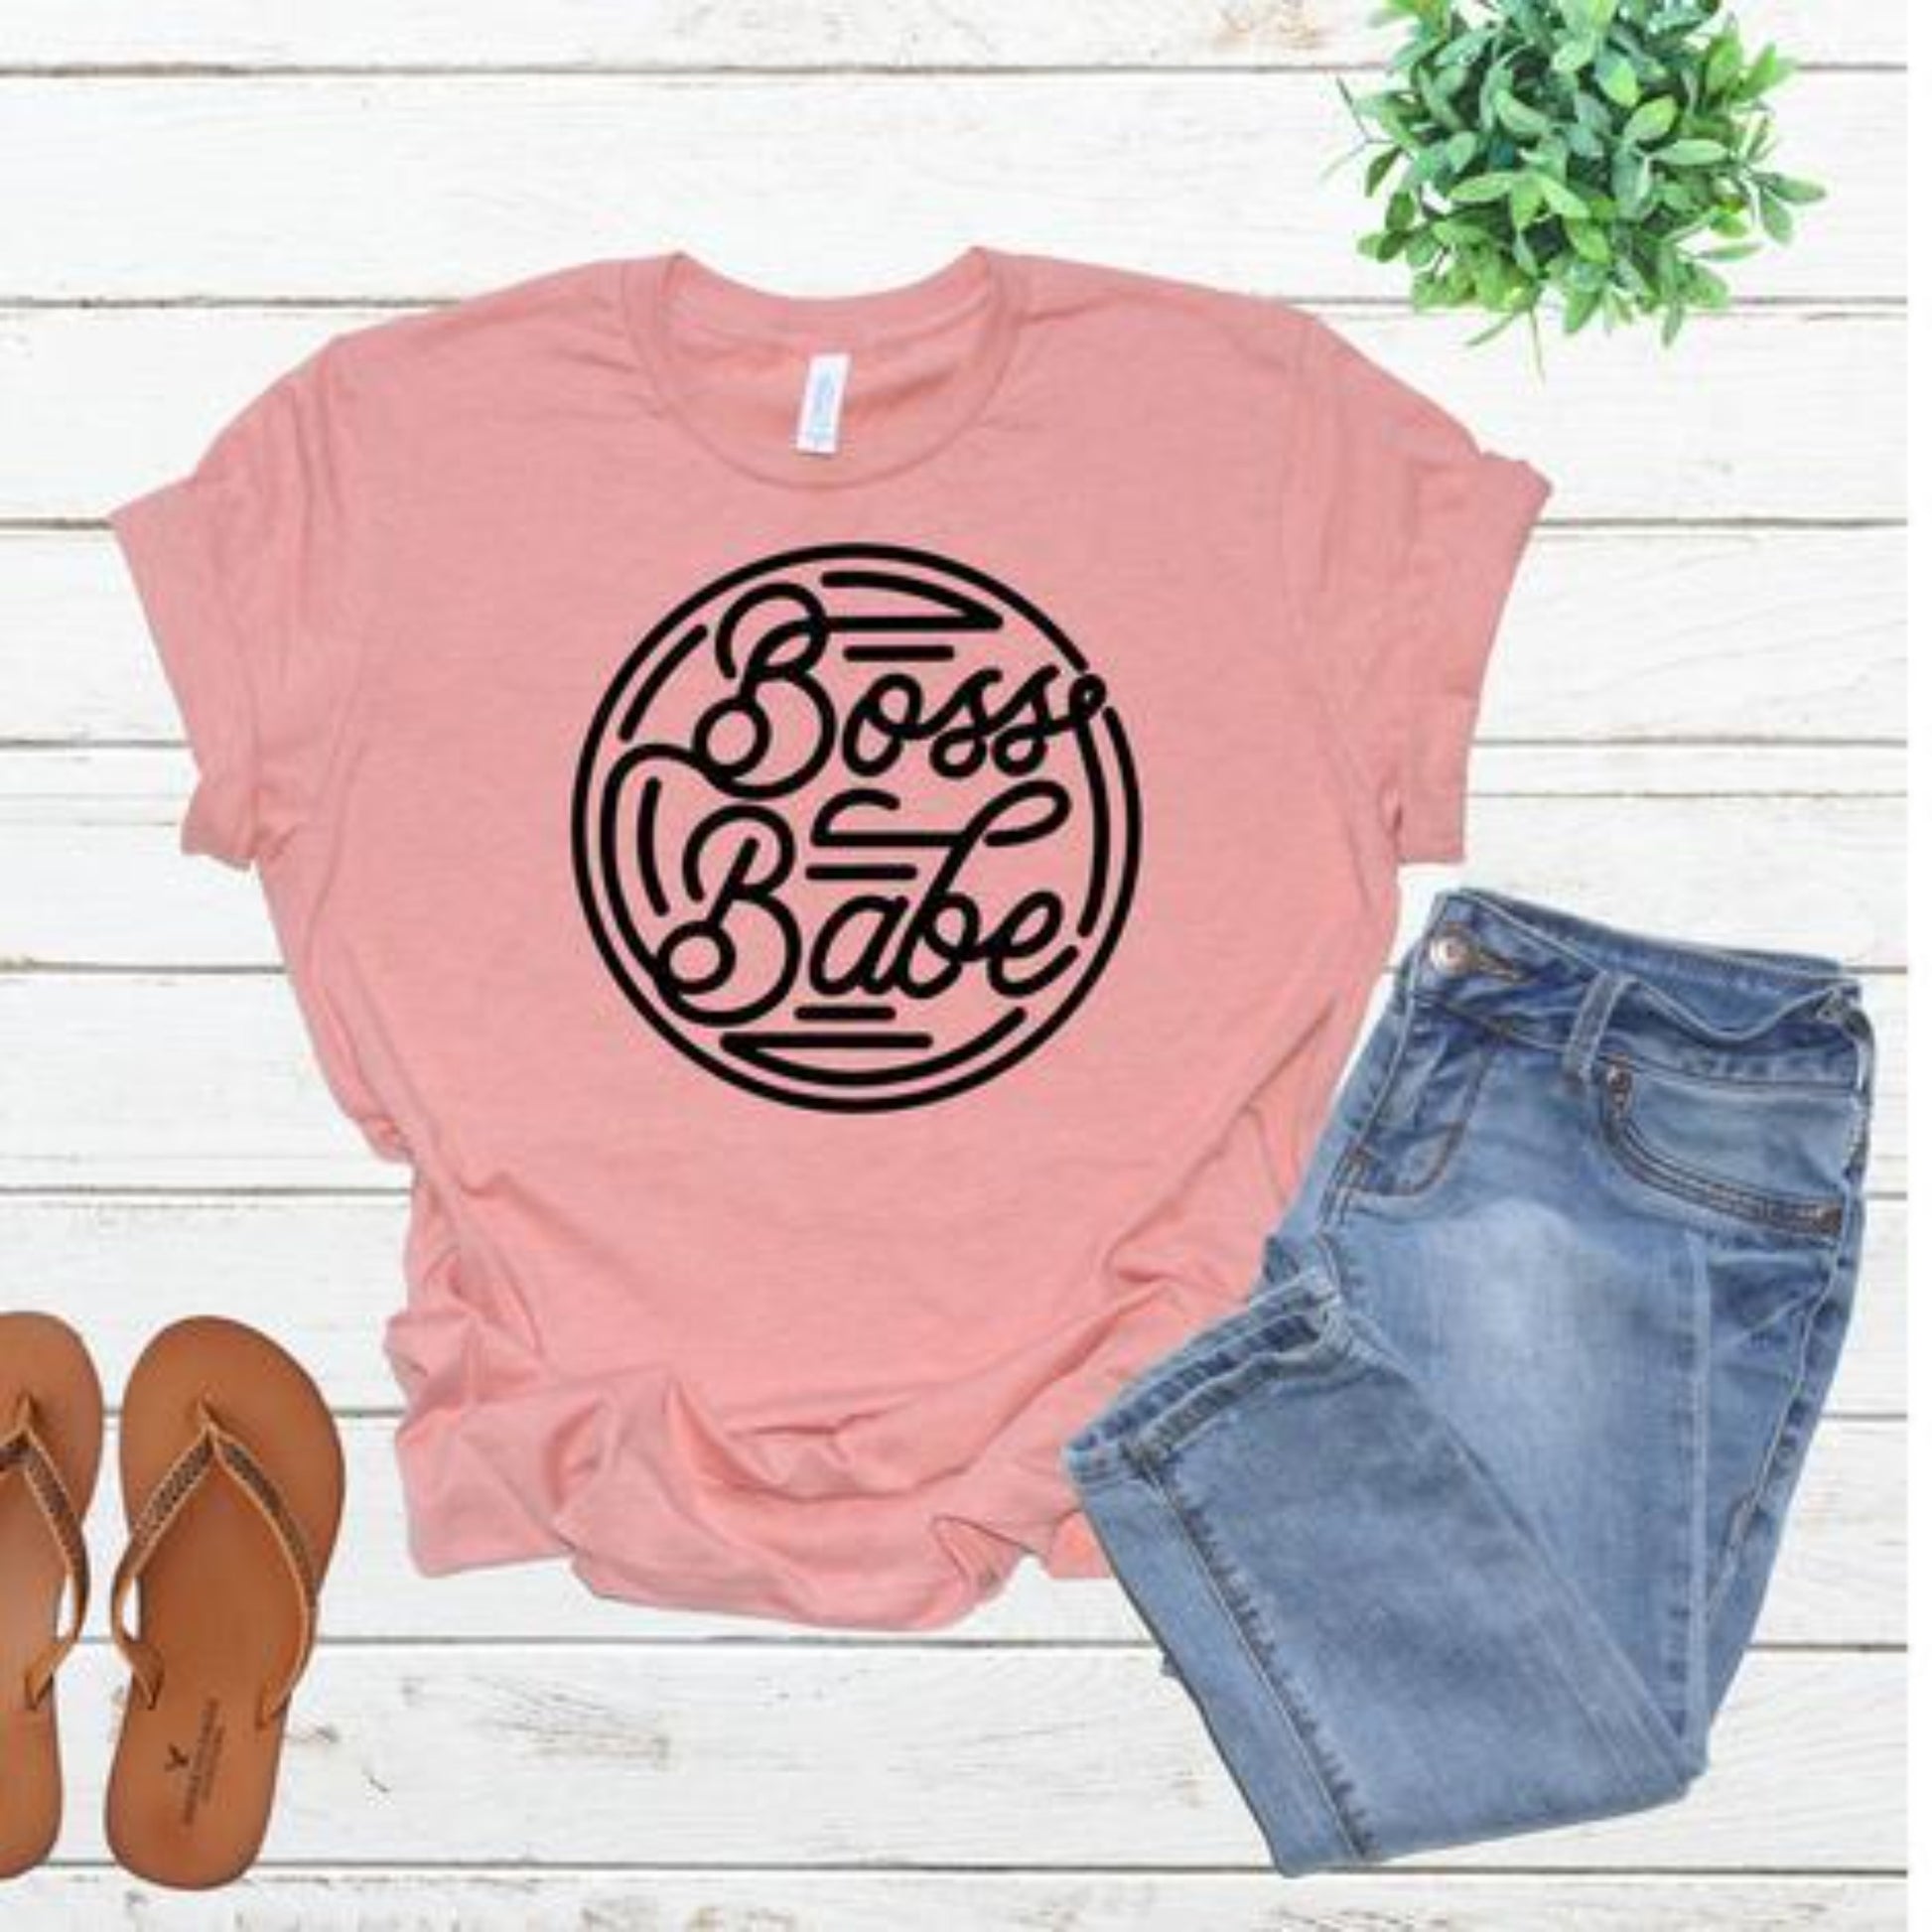 boss_babe specialty tee casual shirt everyday tshirt